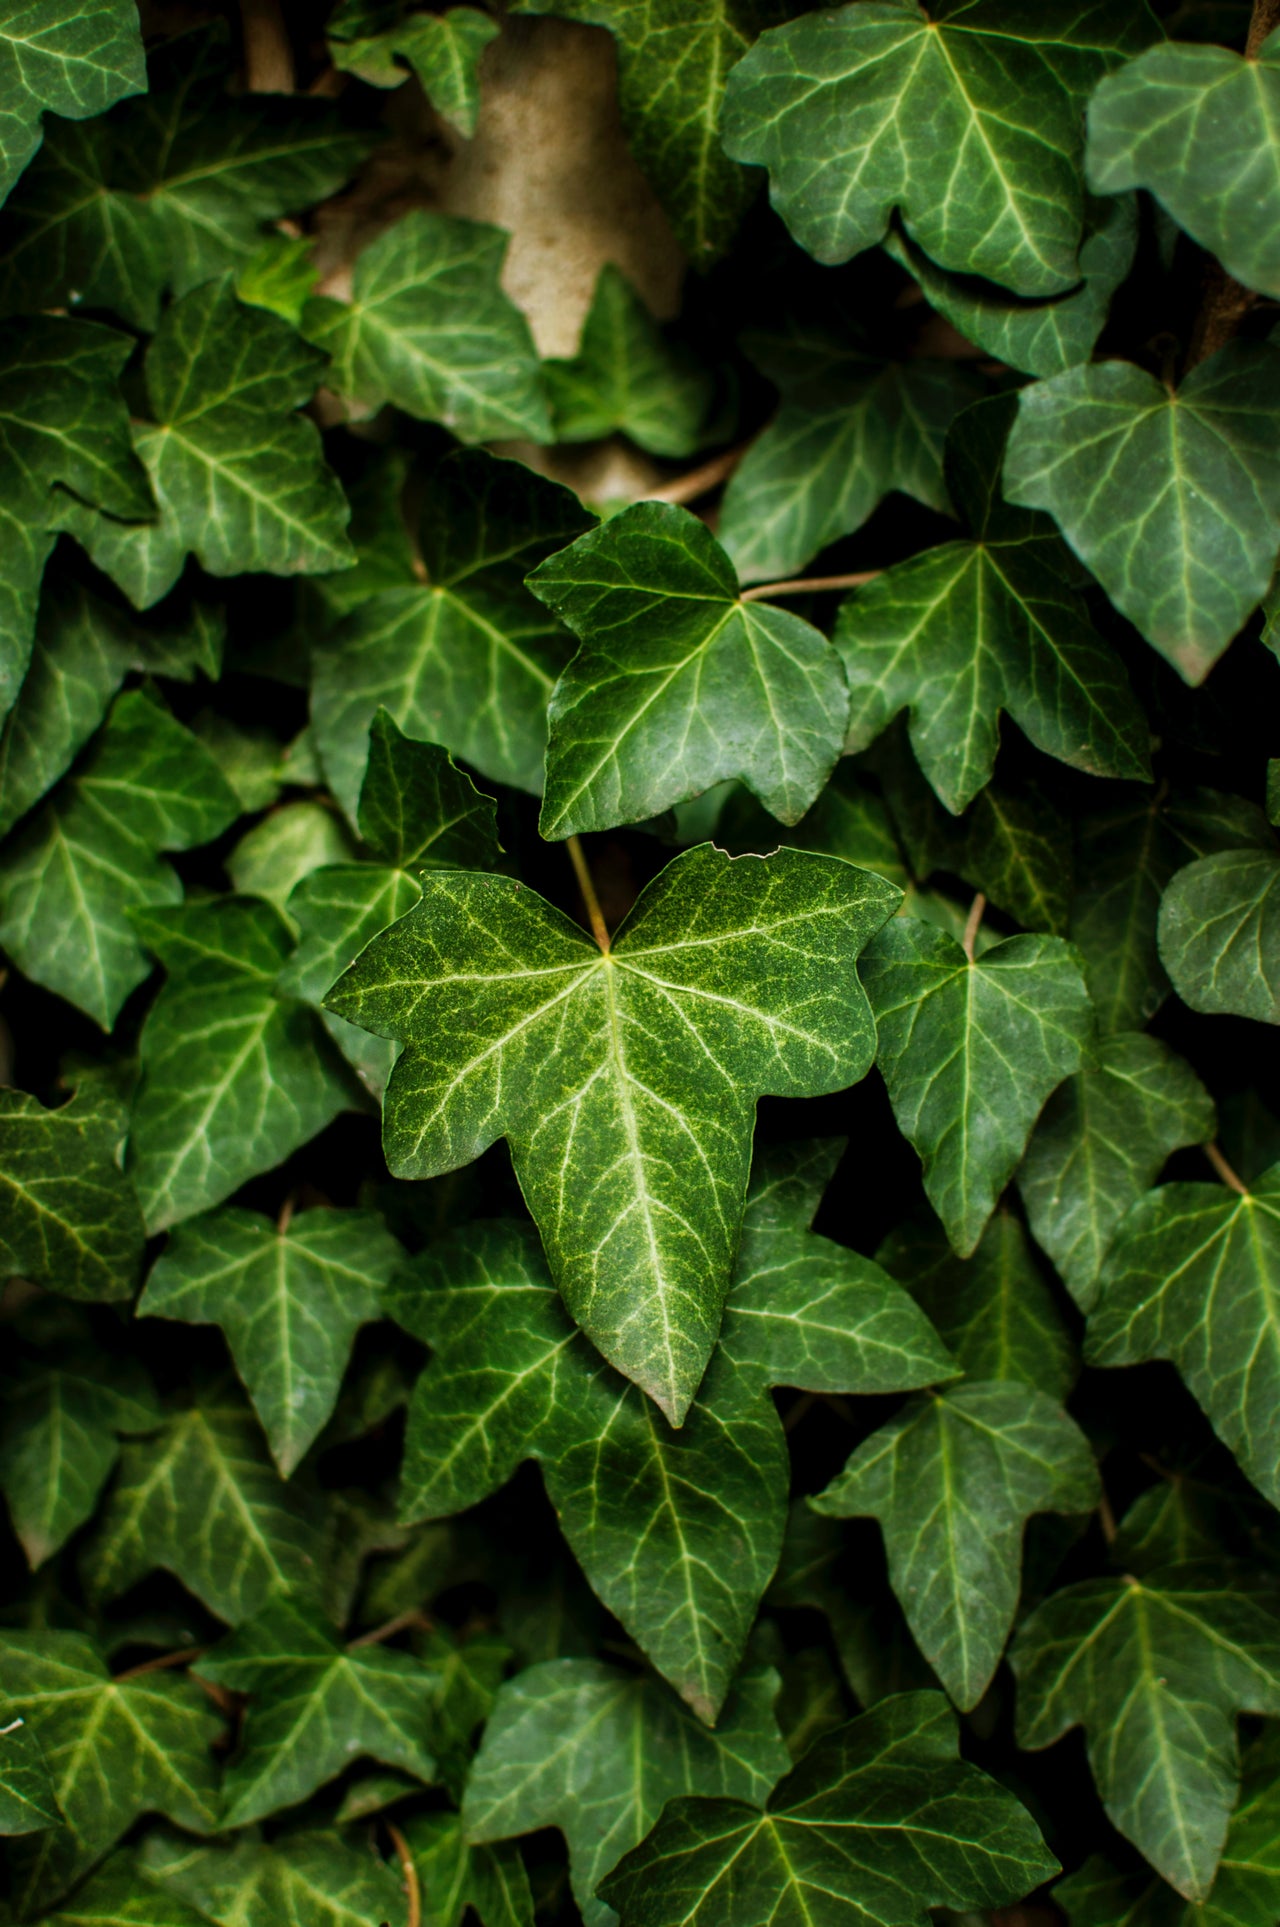 An image of an ivy plant